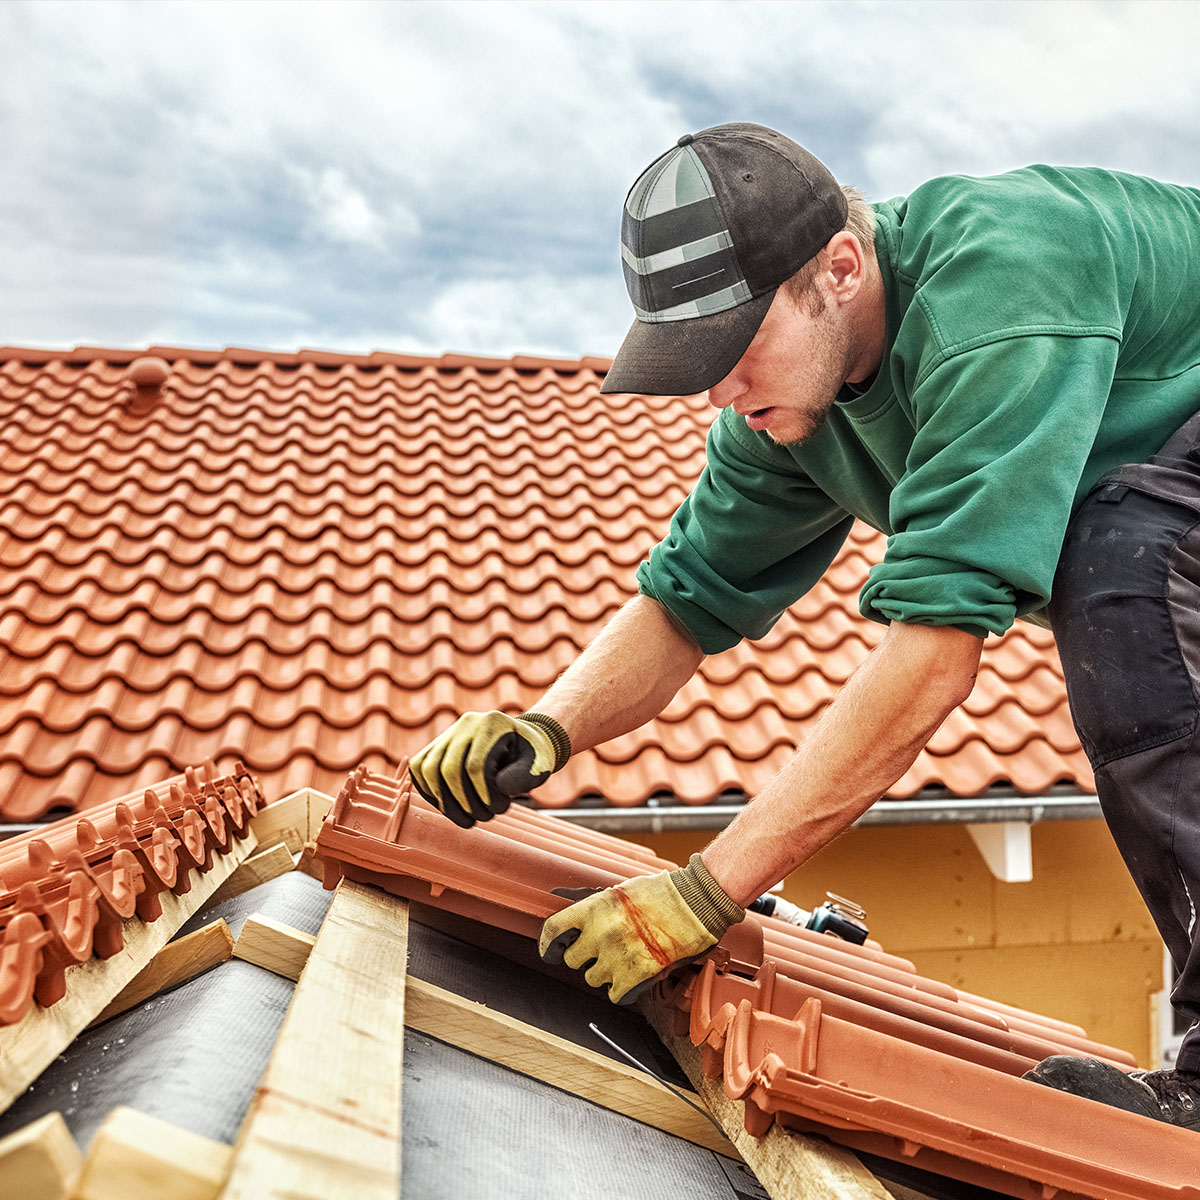 A roofer installing shingles